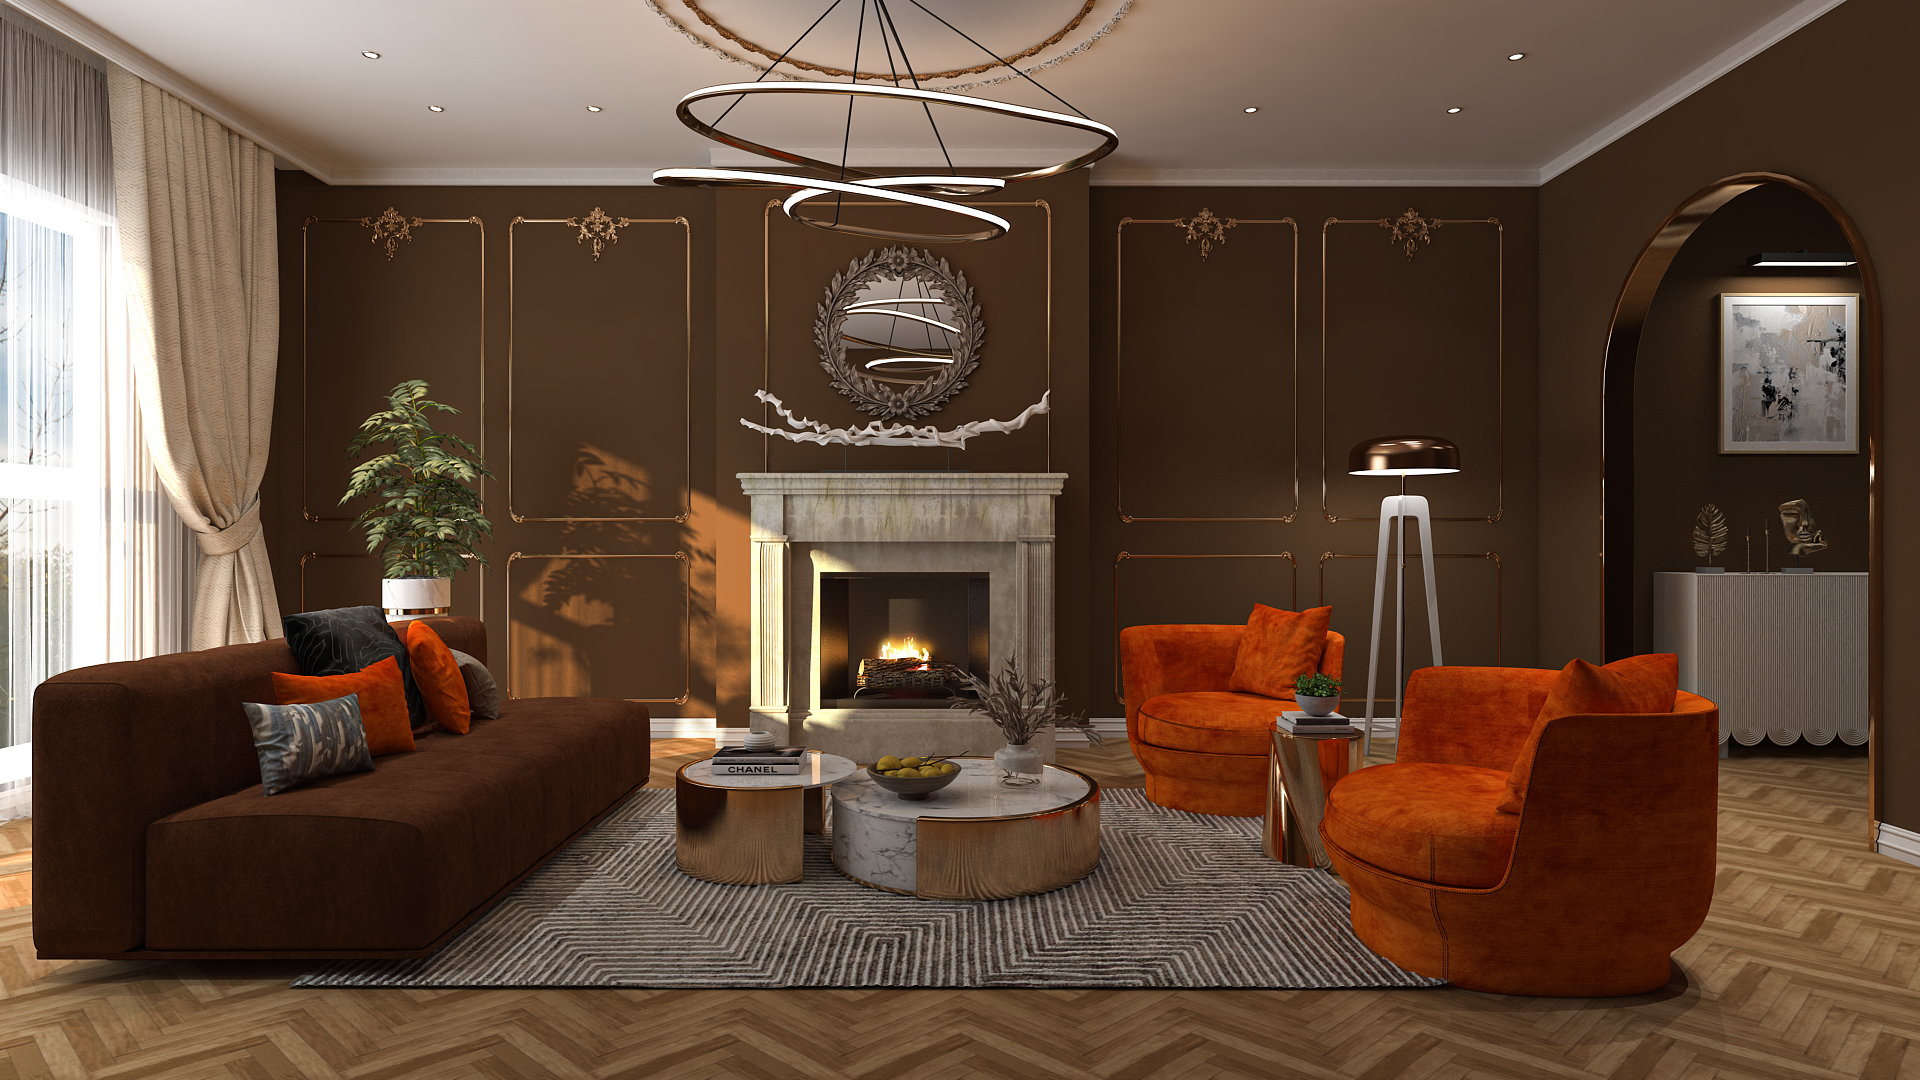 Contemporary Transitional With a Dash of Chocolate Mood